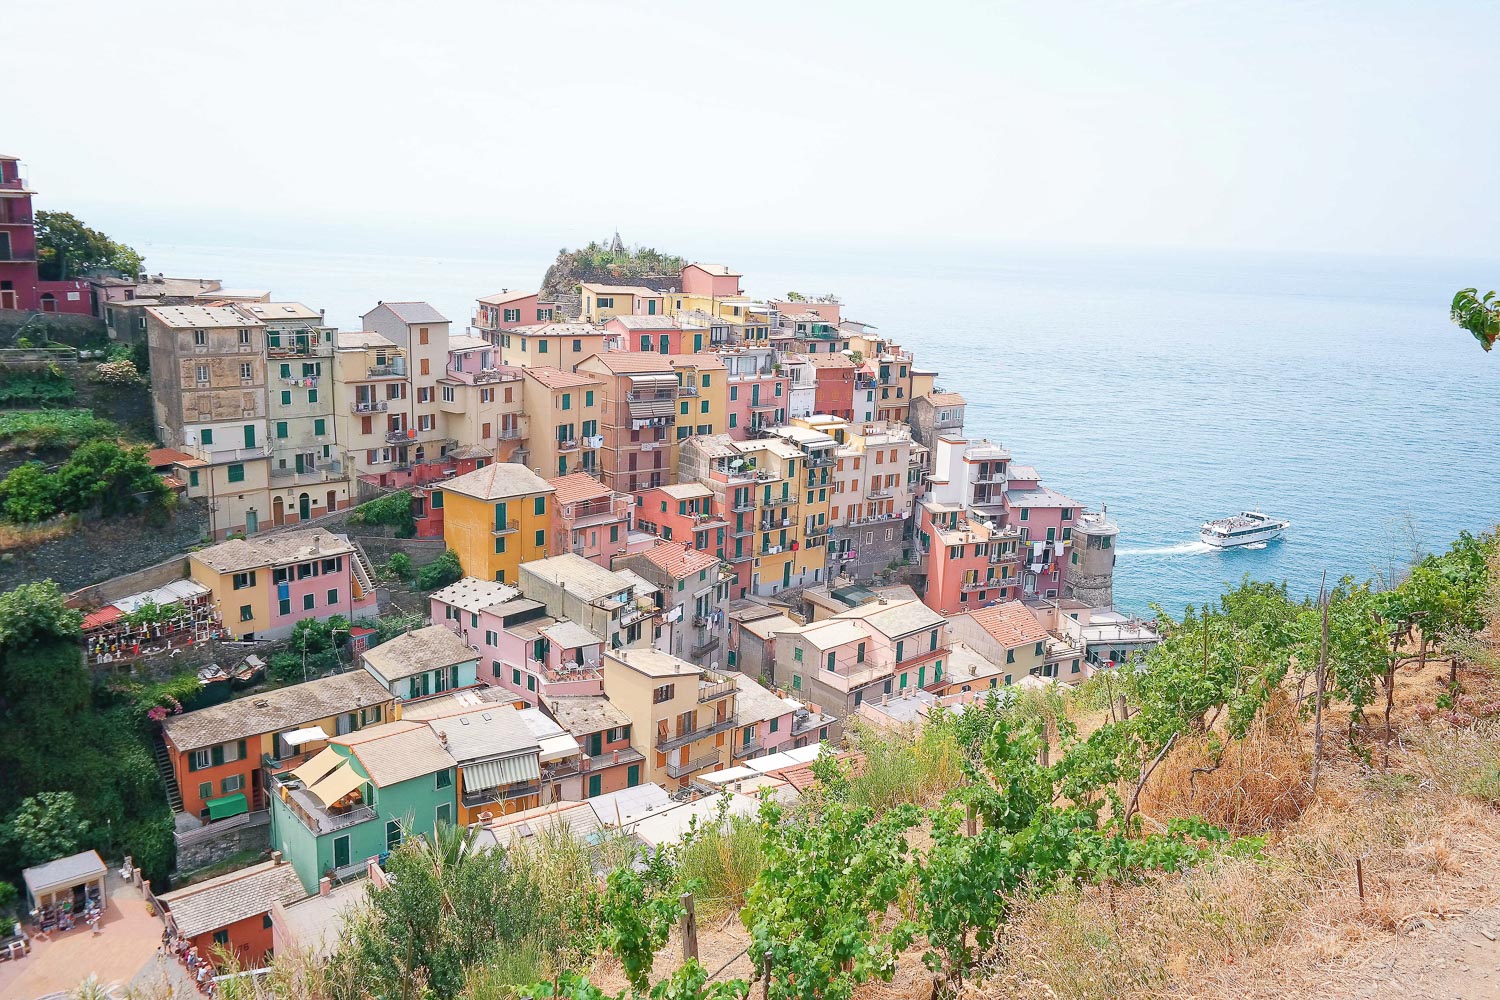 A rainbow assortment of houses in Cinque Terre as seen from the hiking trails